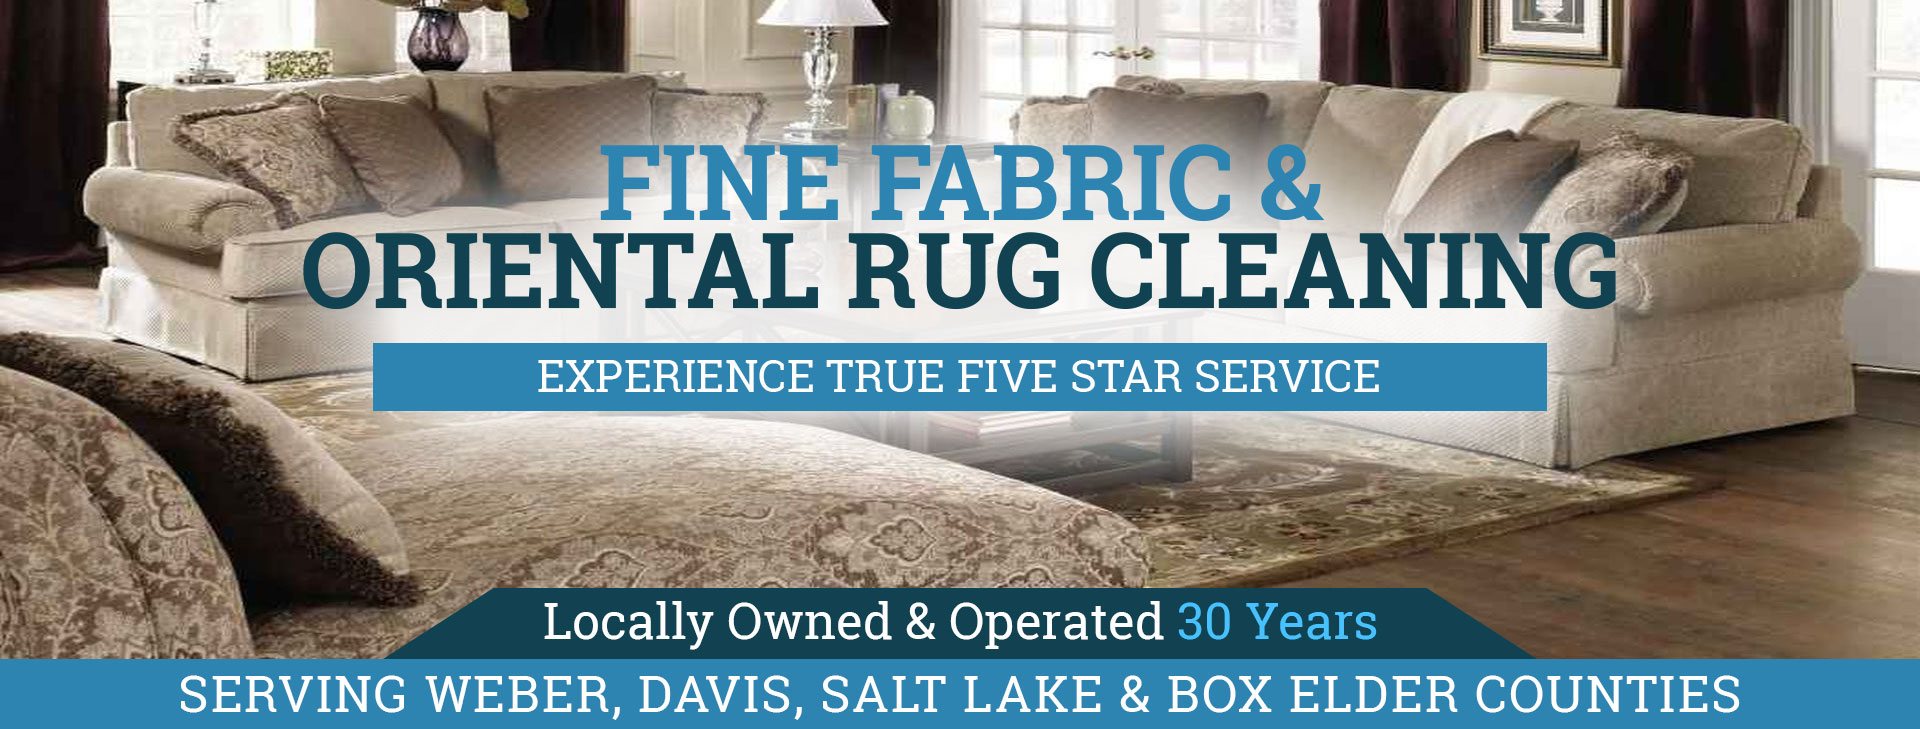 fine fabric and oriental rug cleaning near Salt Lake City